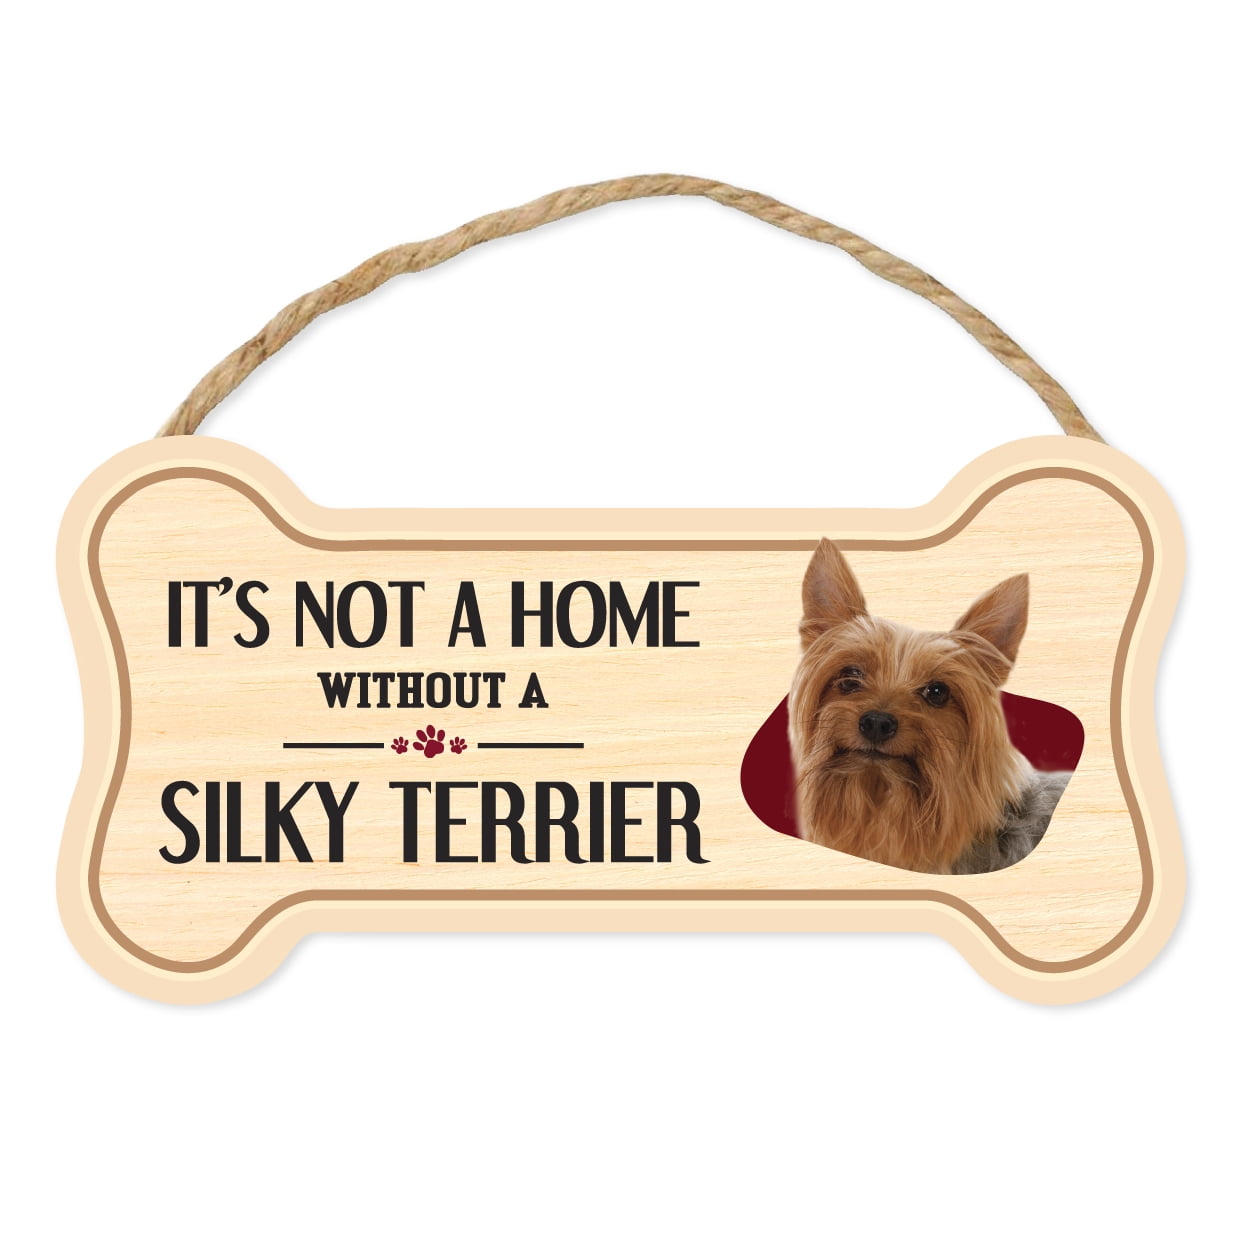 It's Not A Home Without A BULL TERRIERDogs Wood Sign Decorations Gifts 